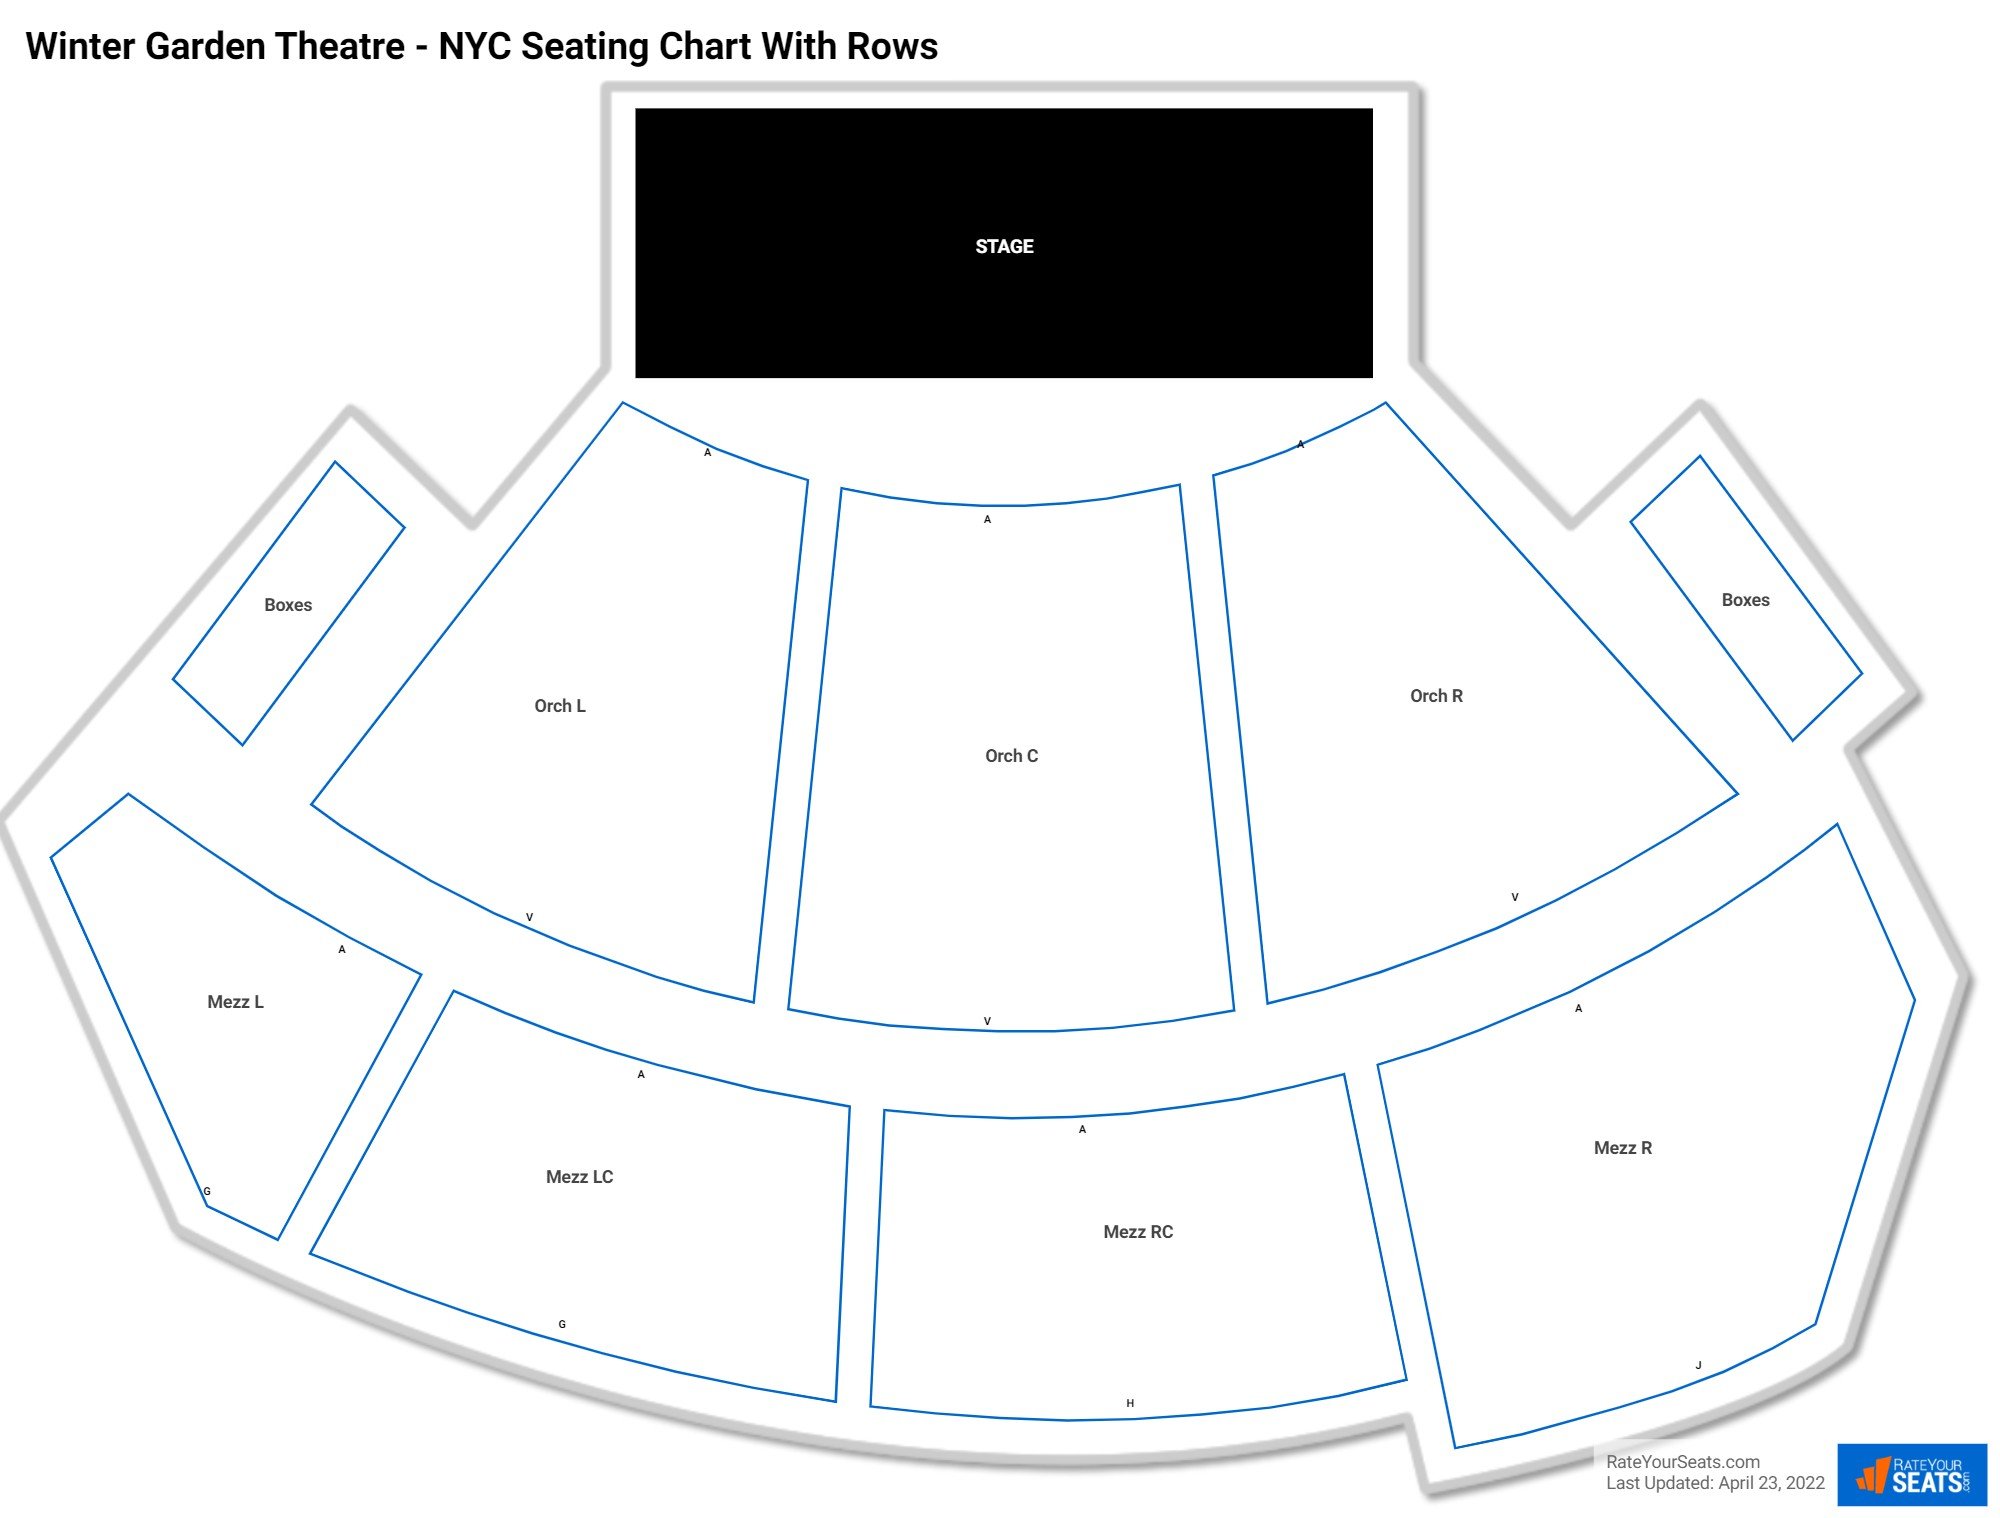 Winter Garden Theatre - NYC seating chart with row numbers